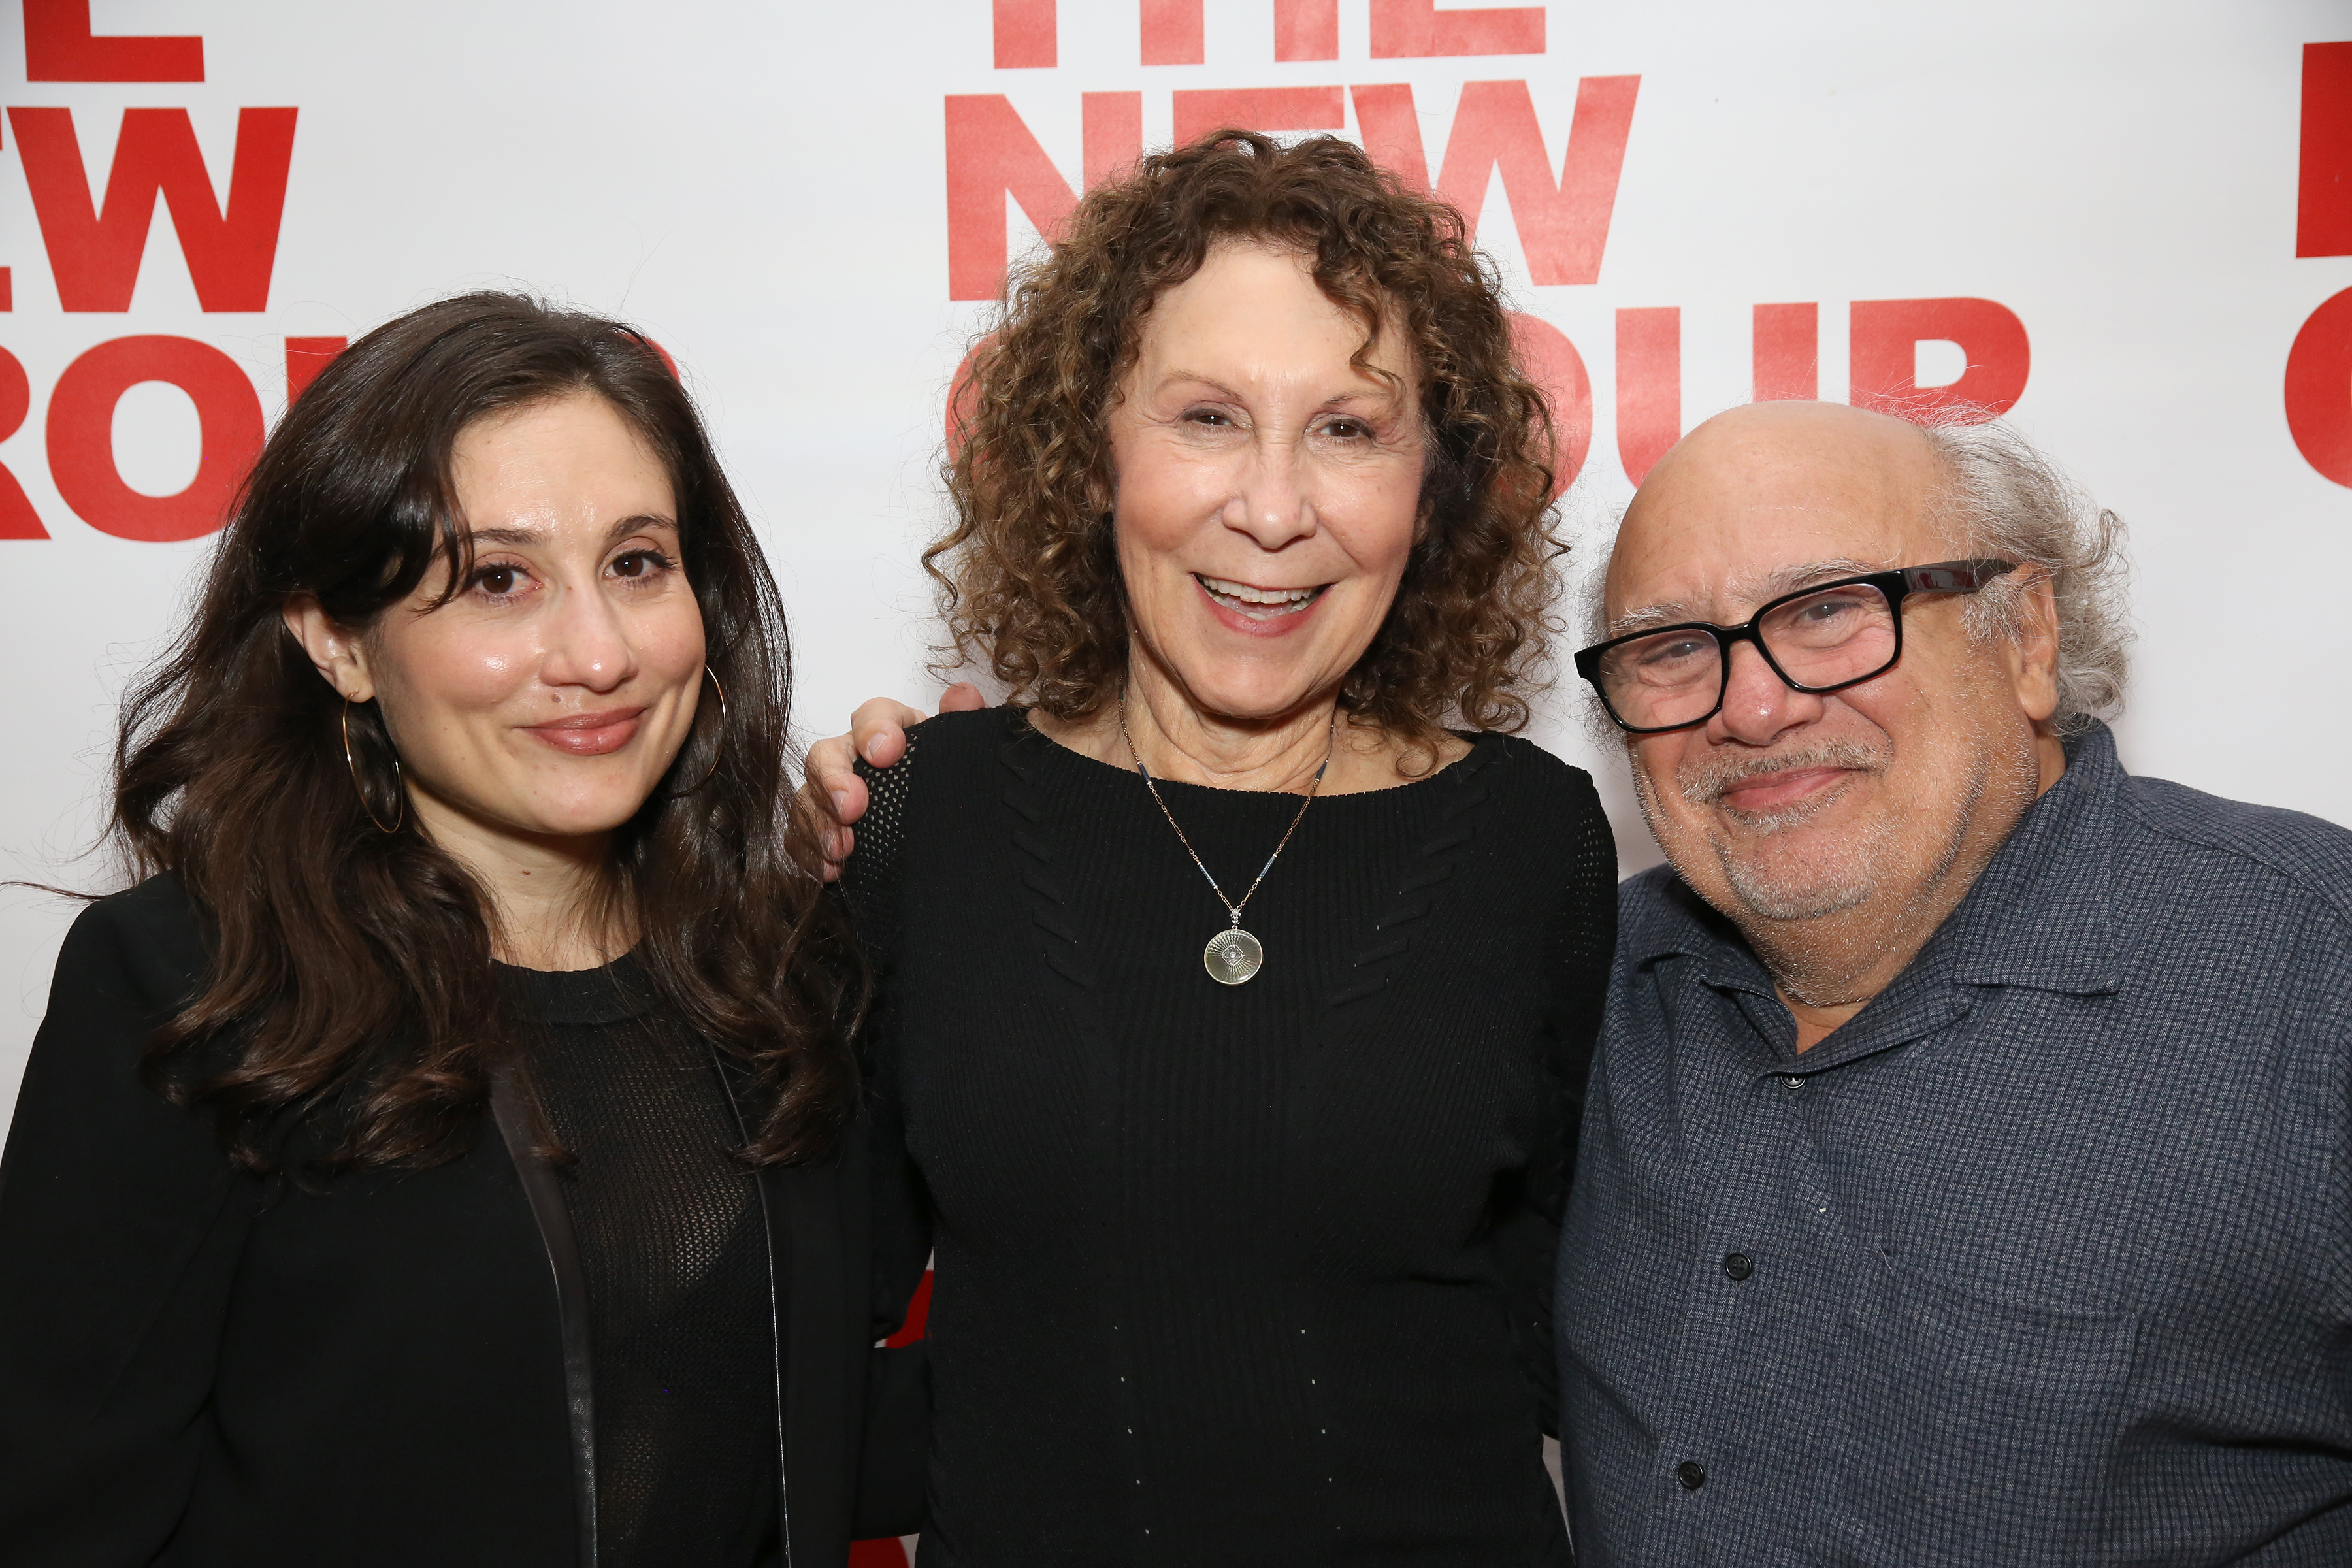 Lucy Devito, Rhea Perlman and Danny Devito at the New York premiere opening night of David Rabe's for "Good for Otto" at the Green Fig Urban Eatery on March 8, 2018, in New York City. | Source: Getty Images